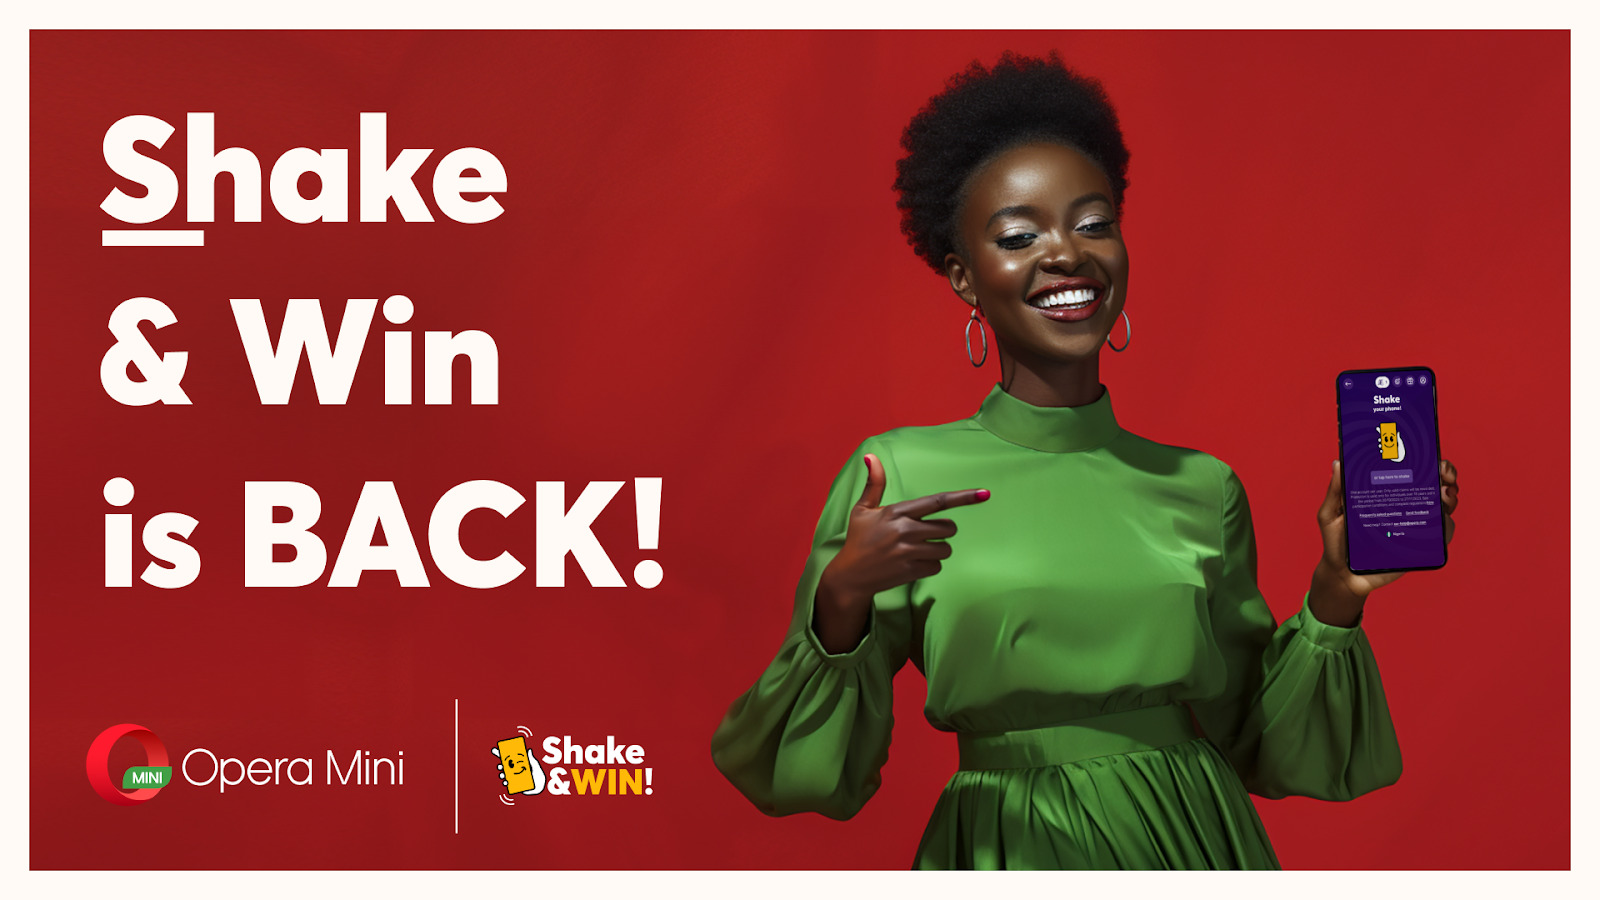 An Opera Mini user evinces the excitement of "Shake and Win."